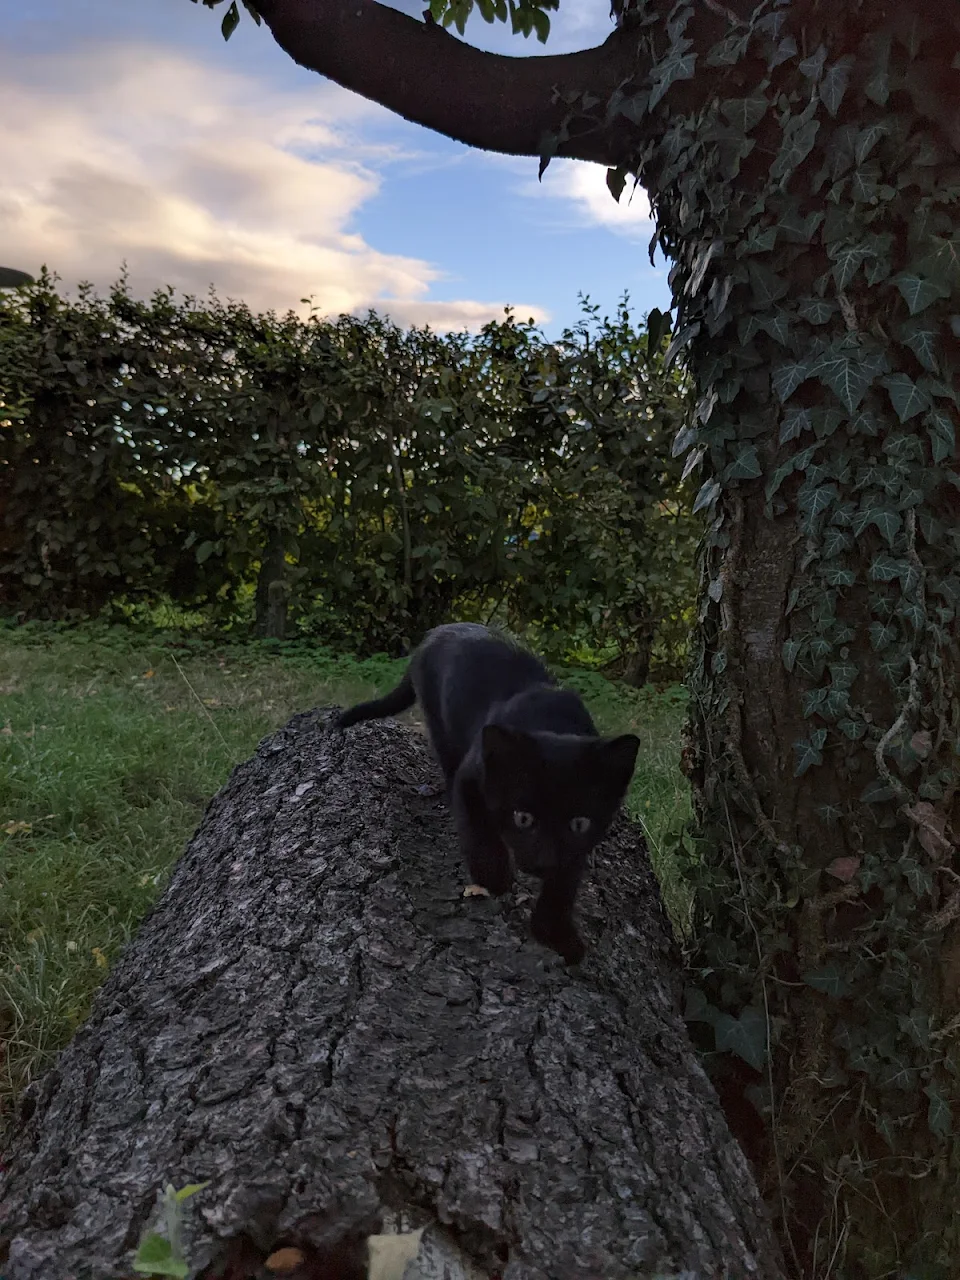 My new kitten looks like a black panther on the hunt.